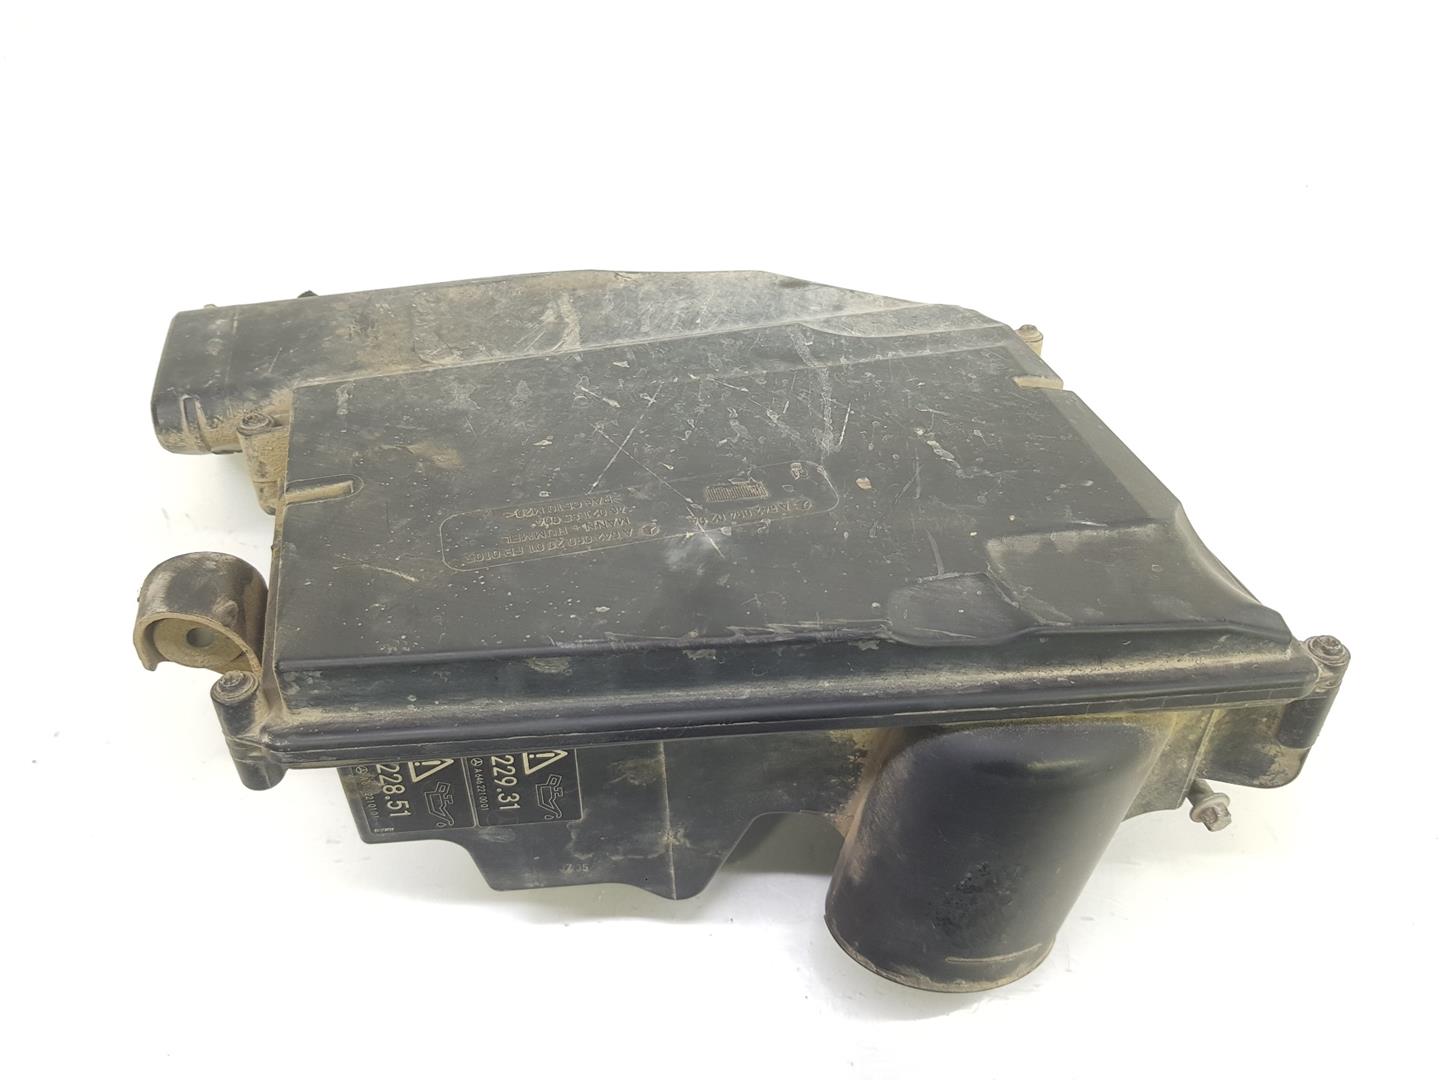 MERCEDES-BENZ M-Class W164 (2005-2011) Other Engine Compartment Parts A6462210001, A6420902001 19858850